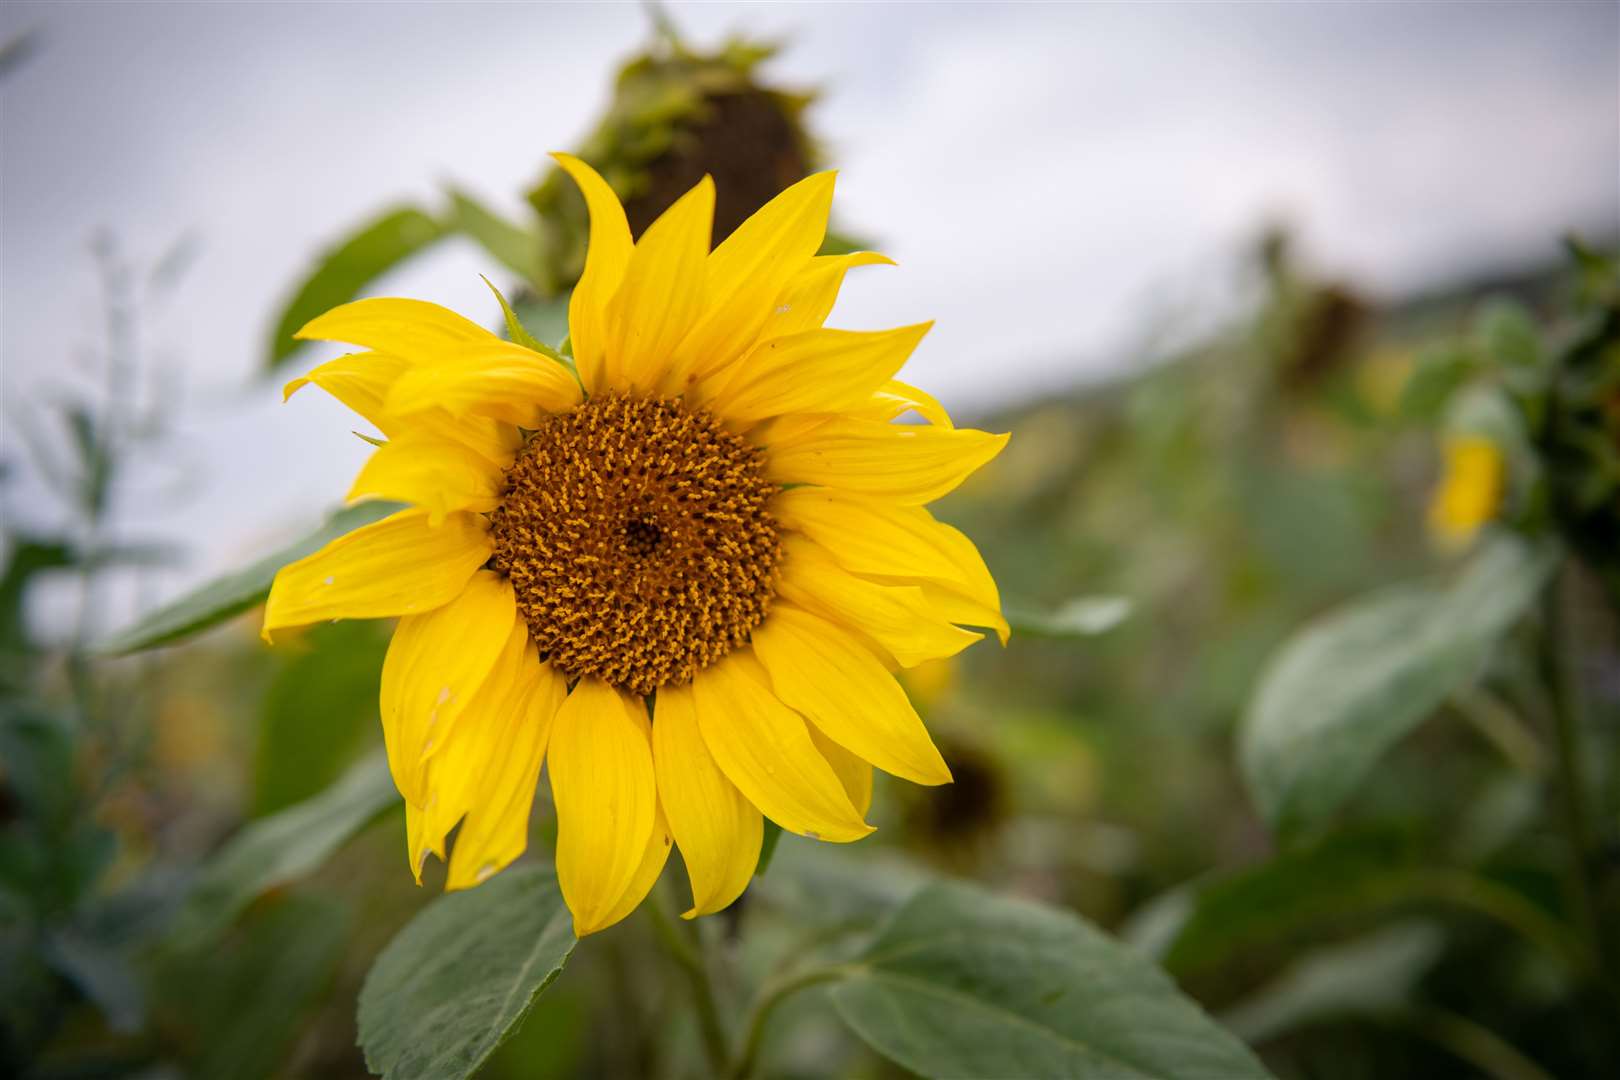 One of the sunflowers. Picture: Callum Mackay